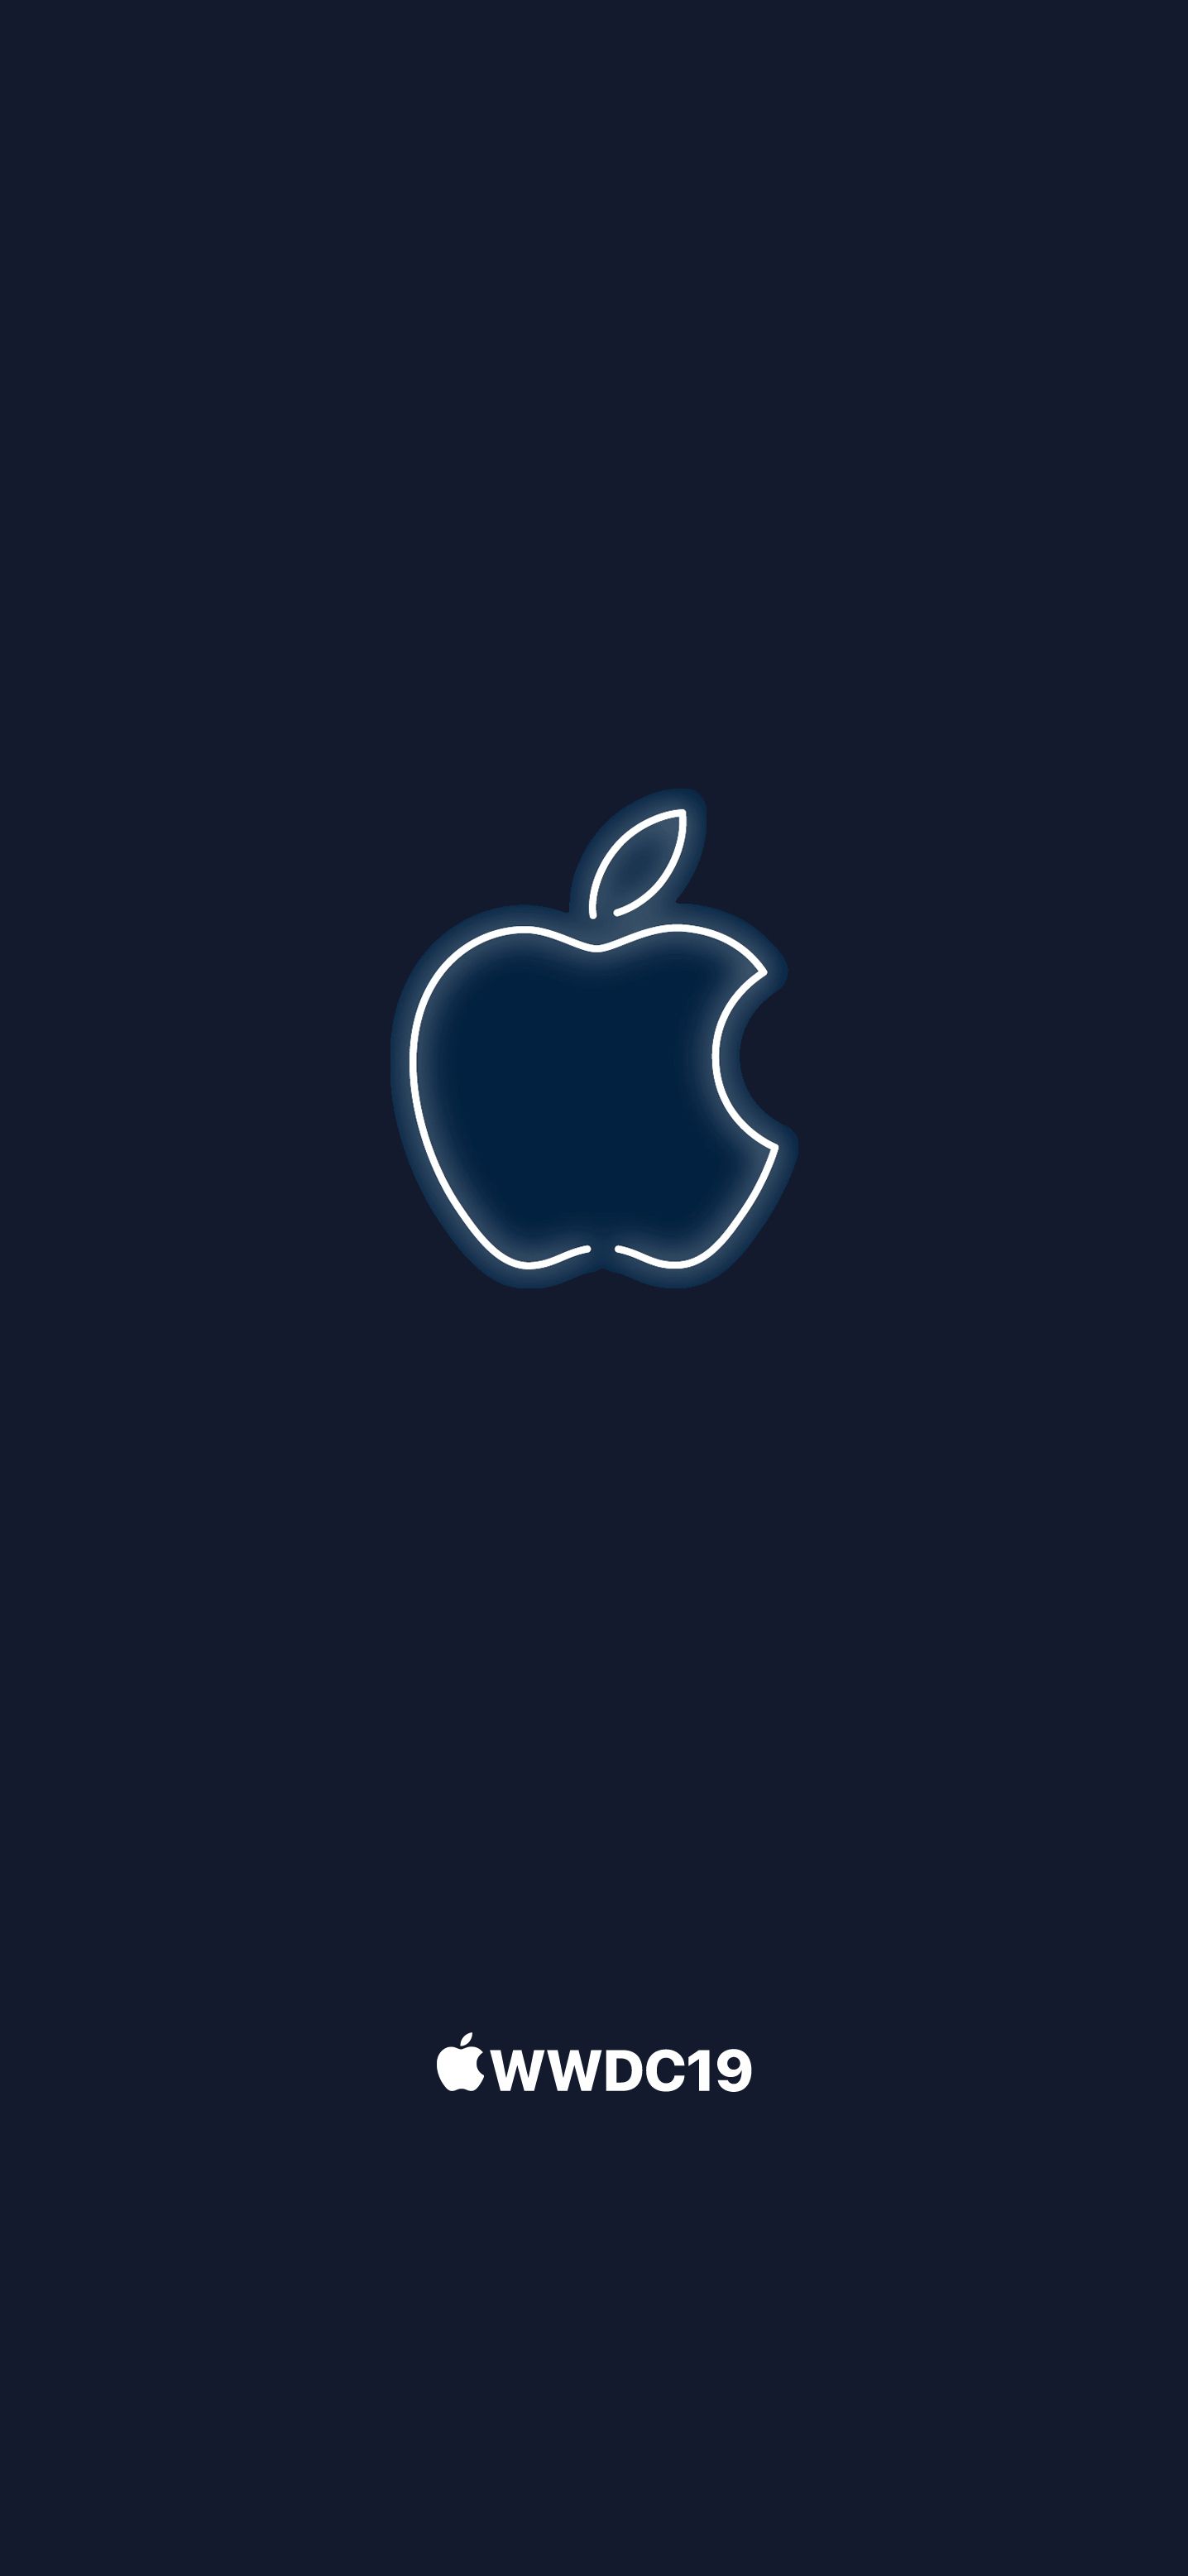 WWDC Wallpapers Wallpaper Cave